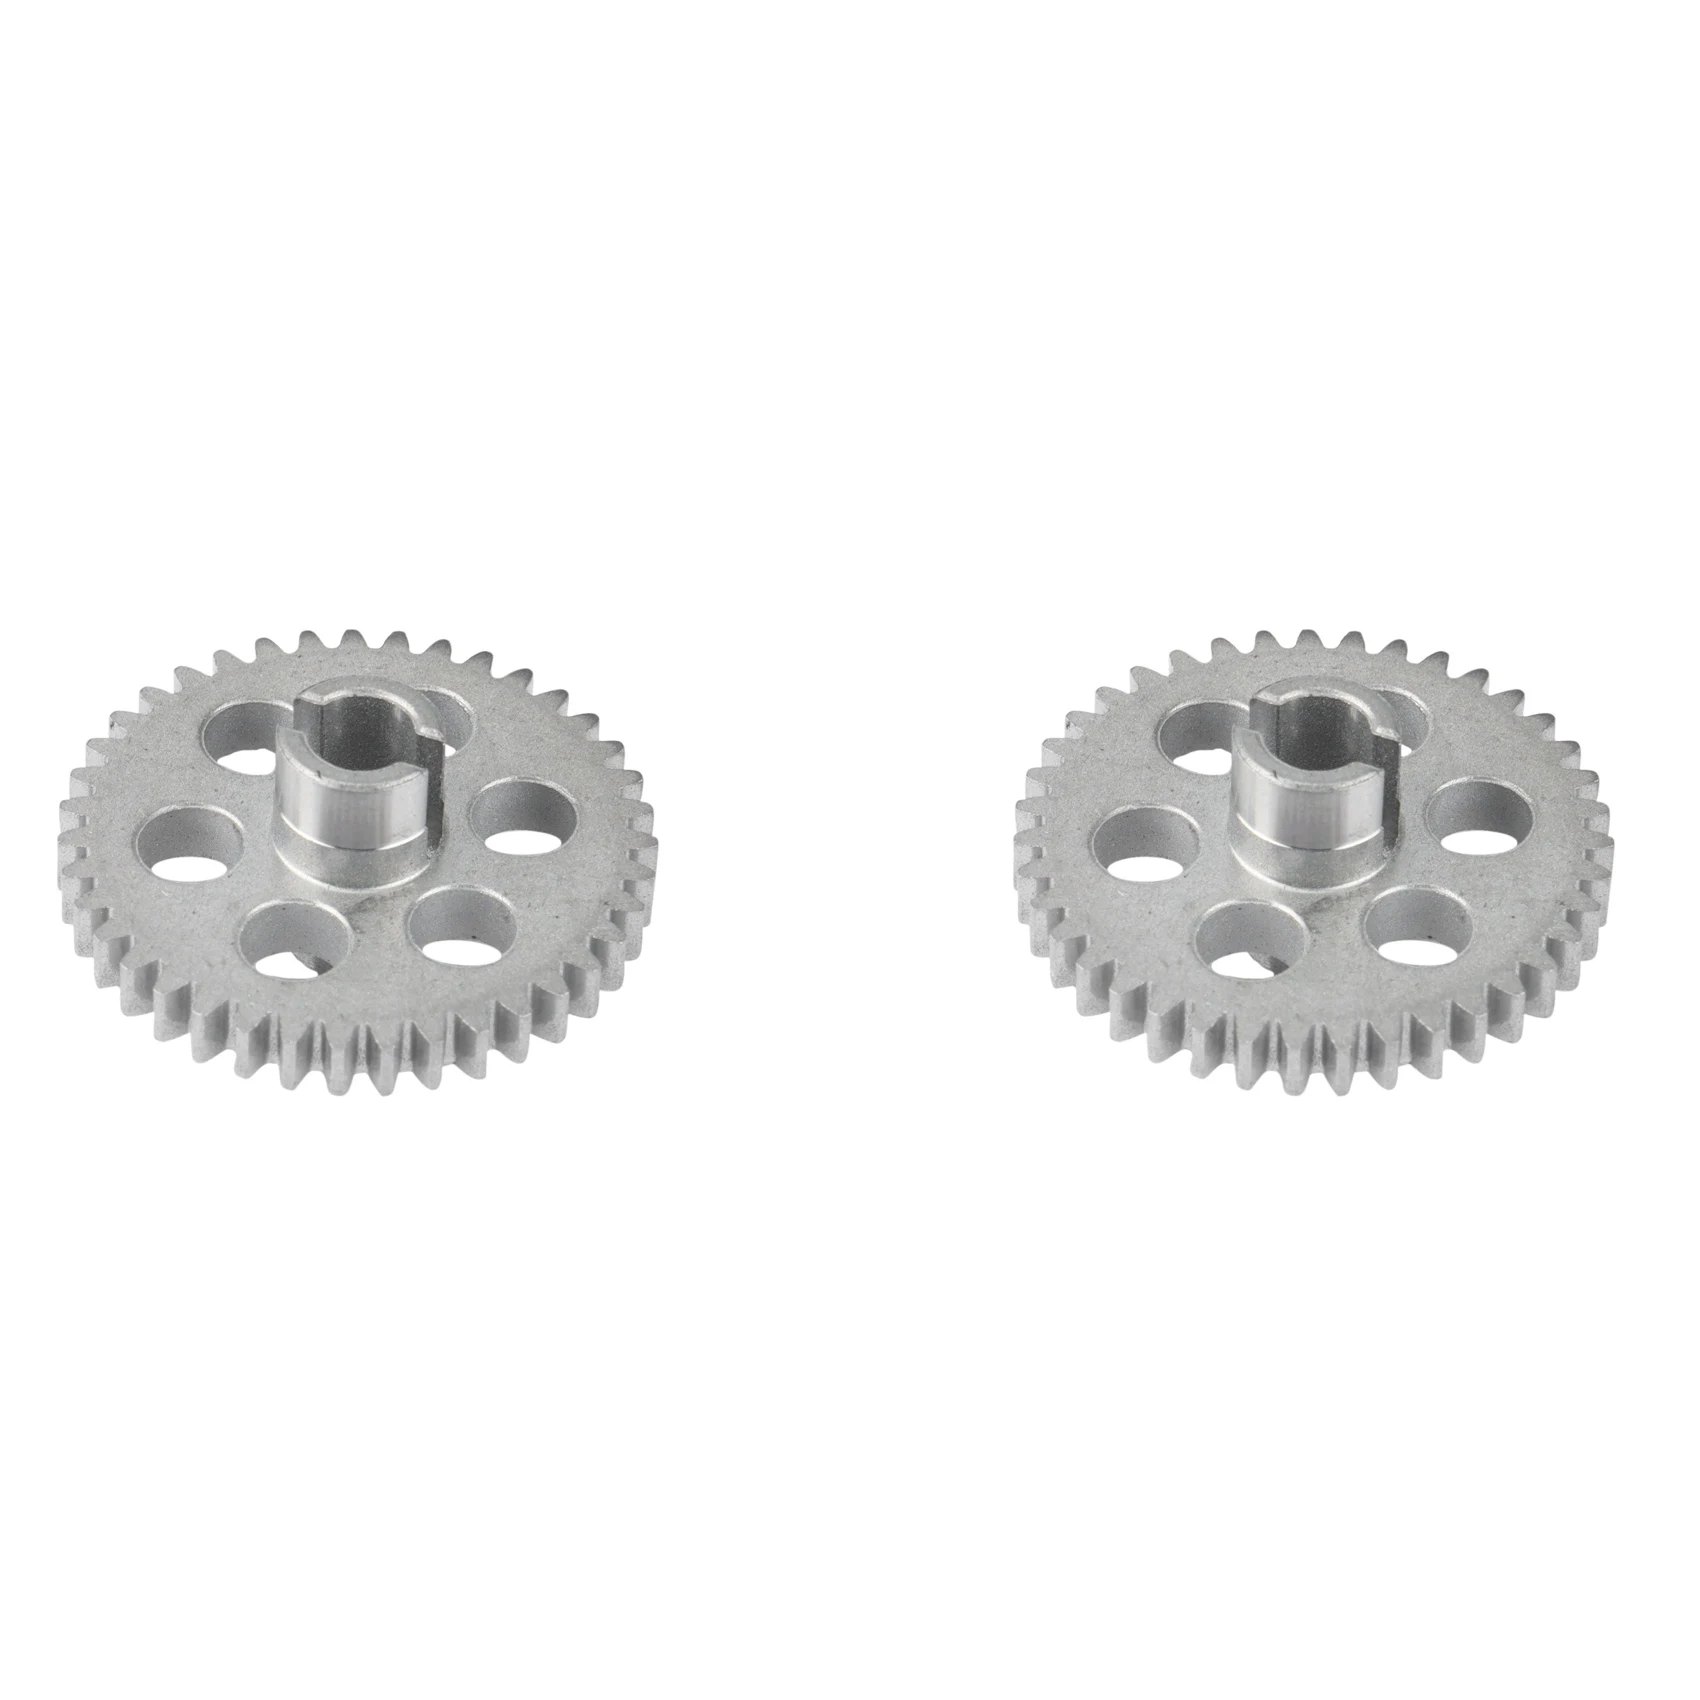 

2X Metal Sintered Hardened Steel Gear G4610 for Remo Hobby Smax 1621 1625 1631 1635 1651 1655 1/16 RC Car Upgrade Parts